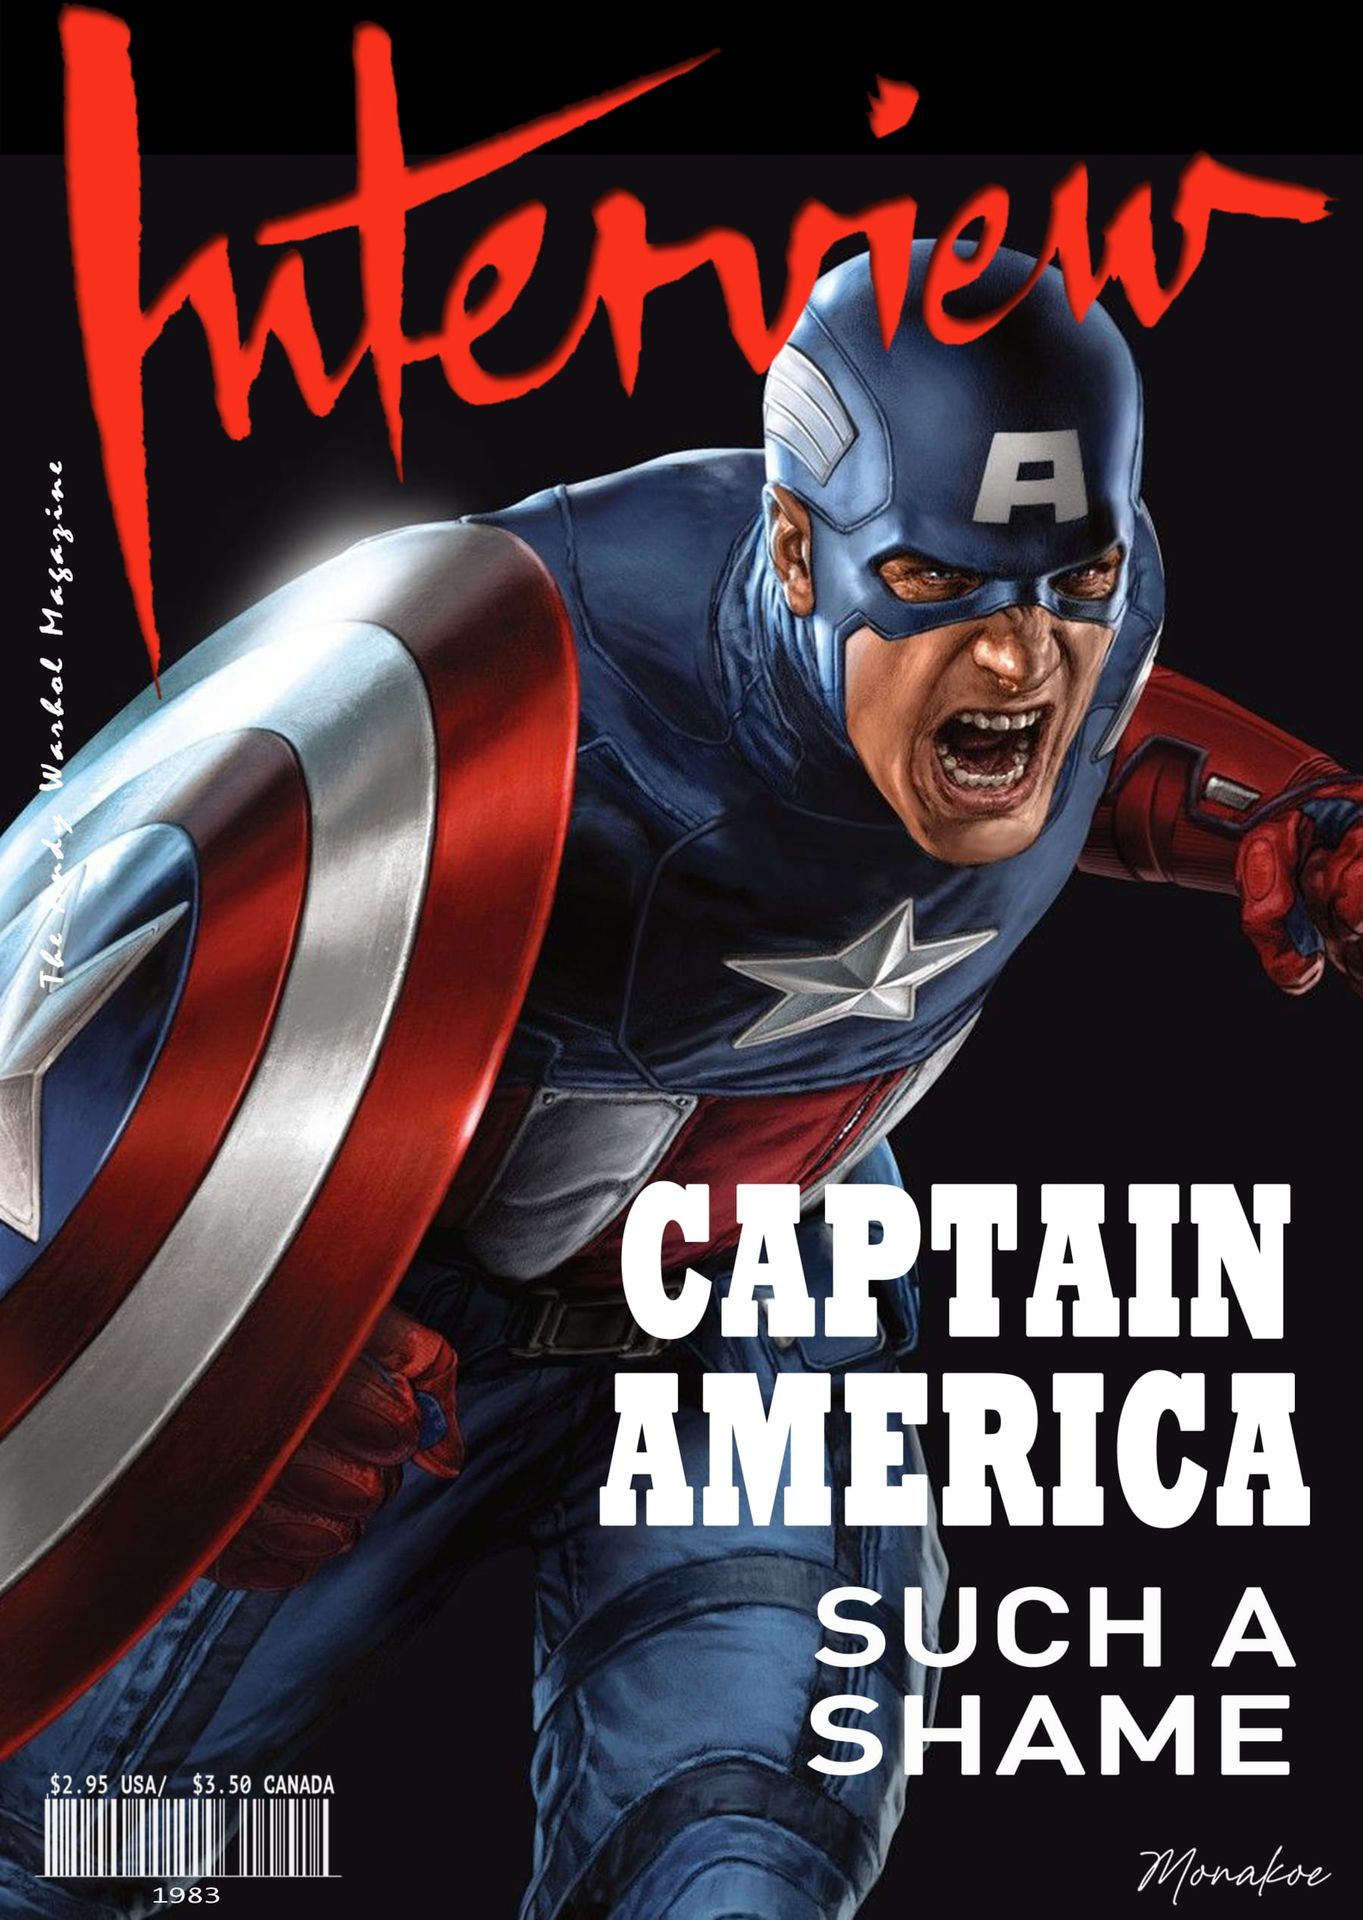 Null Interview the Andy Warhol Magazine (after), Captain America, Monakoe, print&hellip;